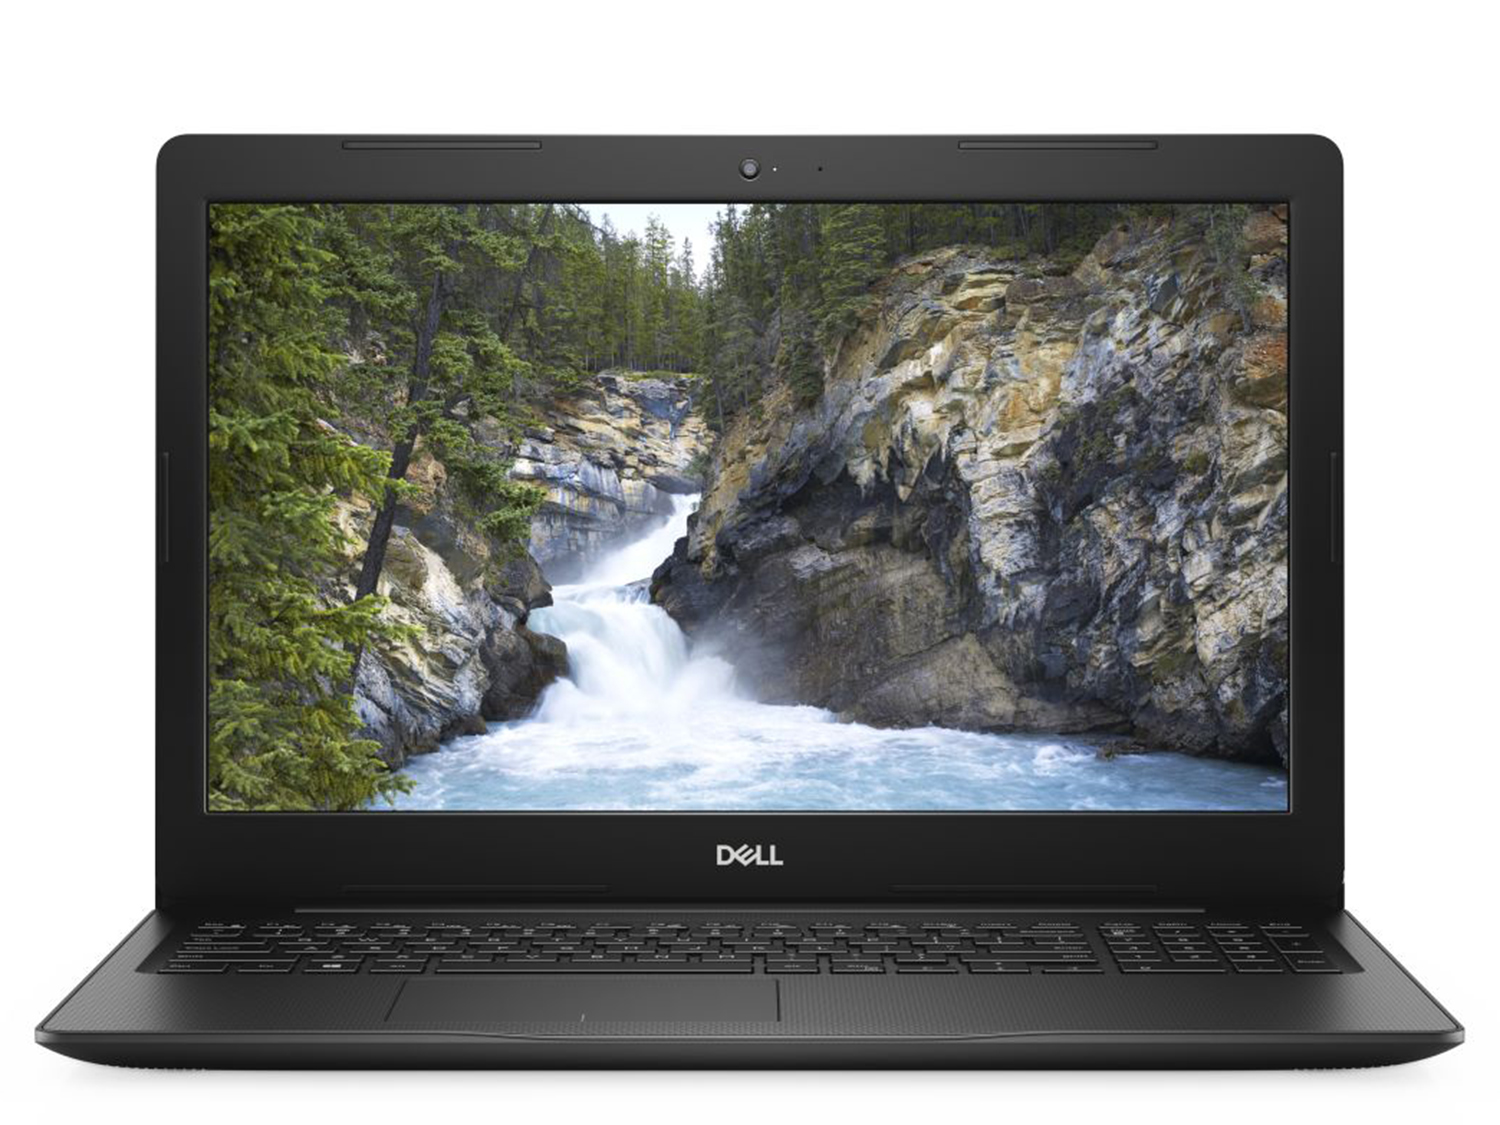 Dell Vostro 3590 review - hardware from today in a chassis from 